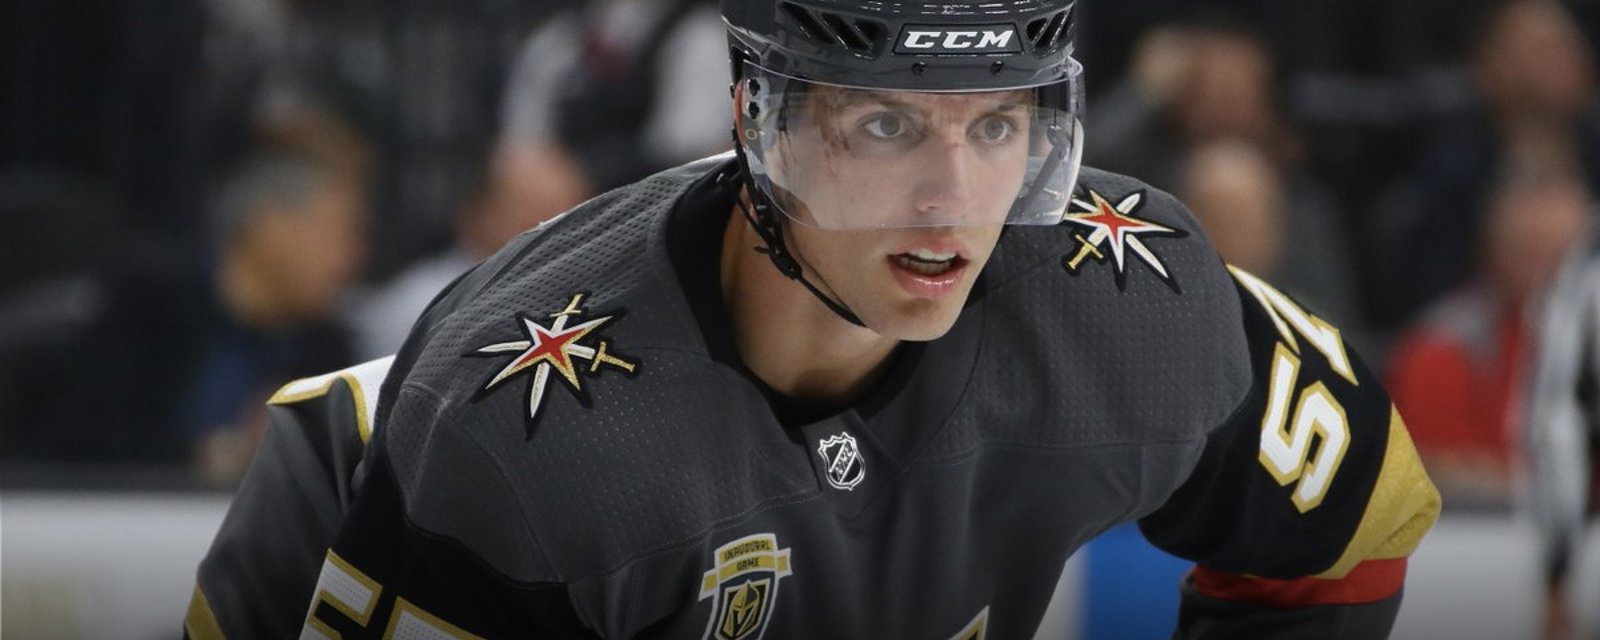 Report: Bad news for Golden Knights' Perron